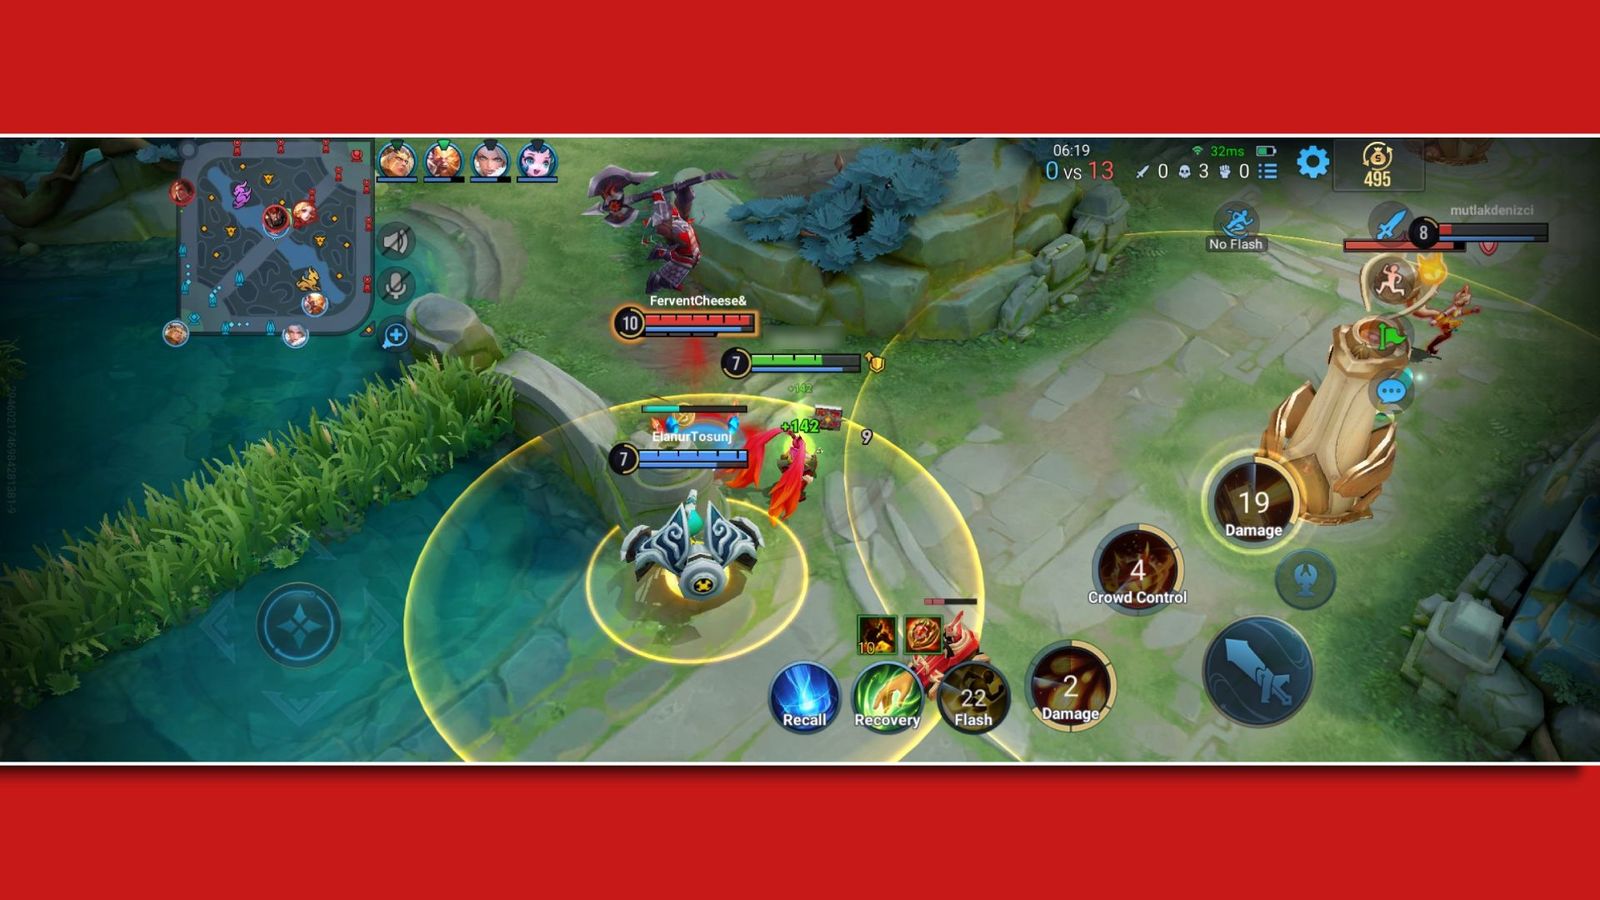 A screenshot of Honor of Kings gameplay as Angela, with the player attacking an enemy with their team next to a tower.